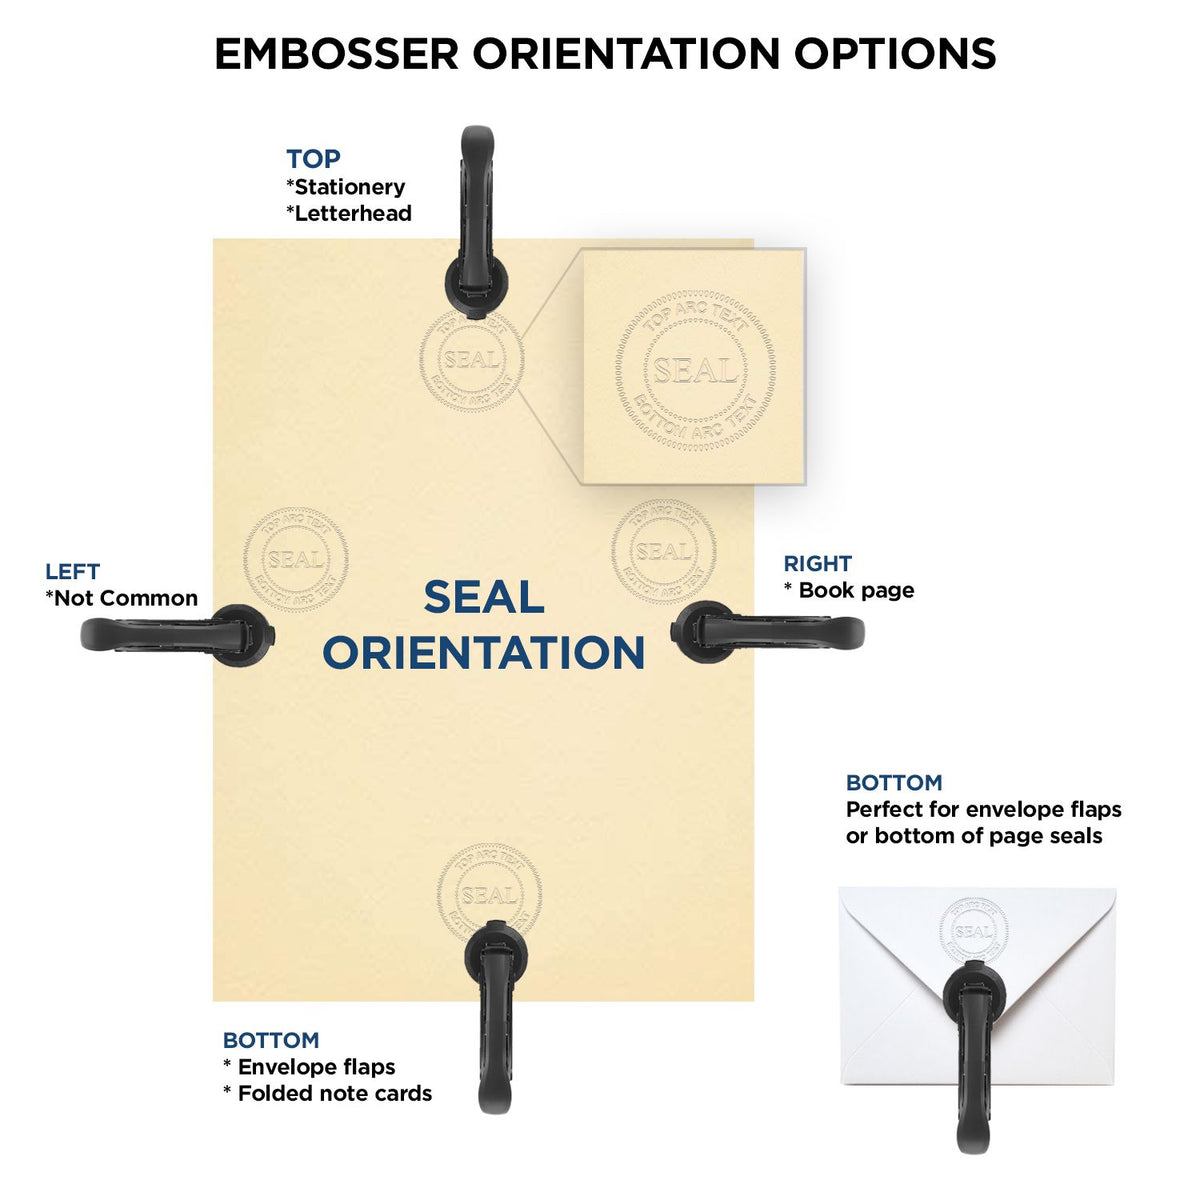 An infographic for the Handheld Oklahoma Professional Geologist Embosser showing embosser orientation, this is showing examples of a top, bottom, right and left insert.